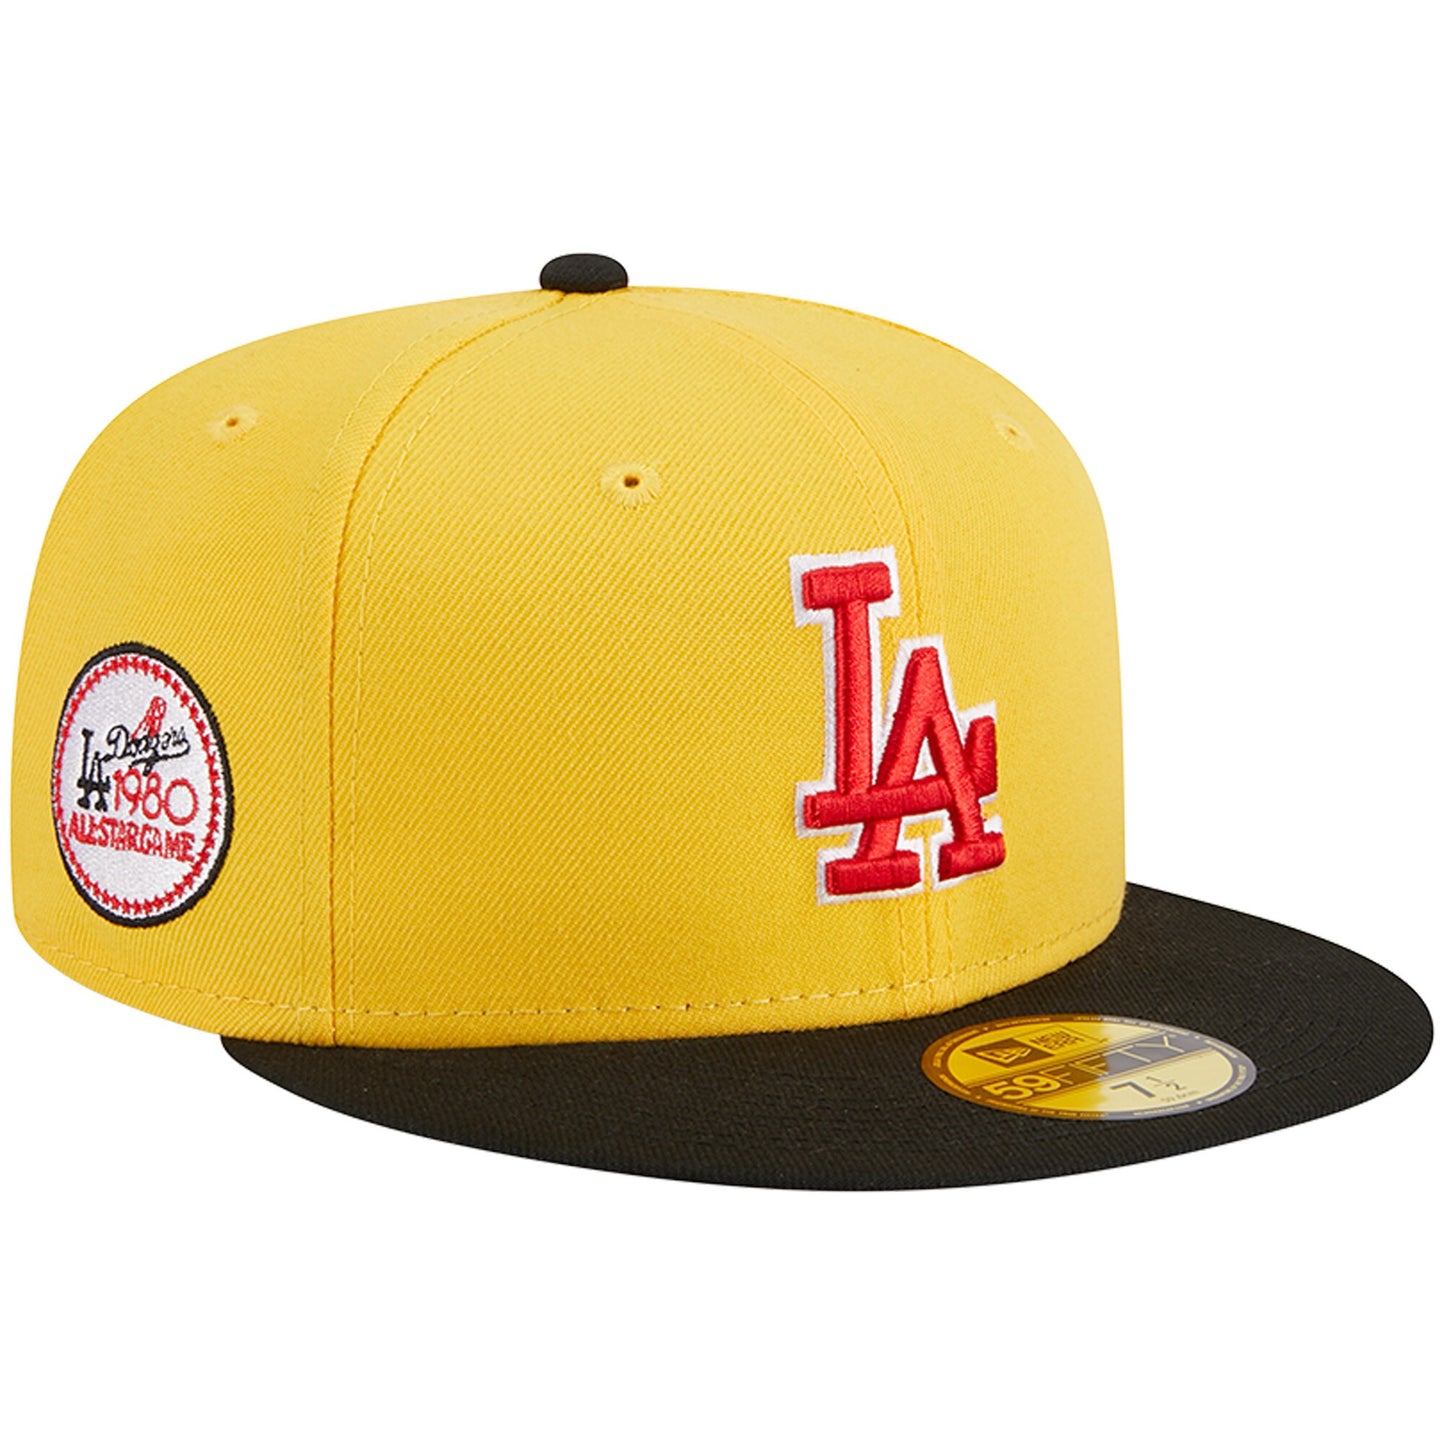 Los Angeles Dodgers New Era Grilled 59FIFTY Fitted Hat - Yellow/Black